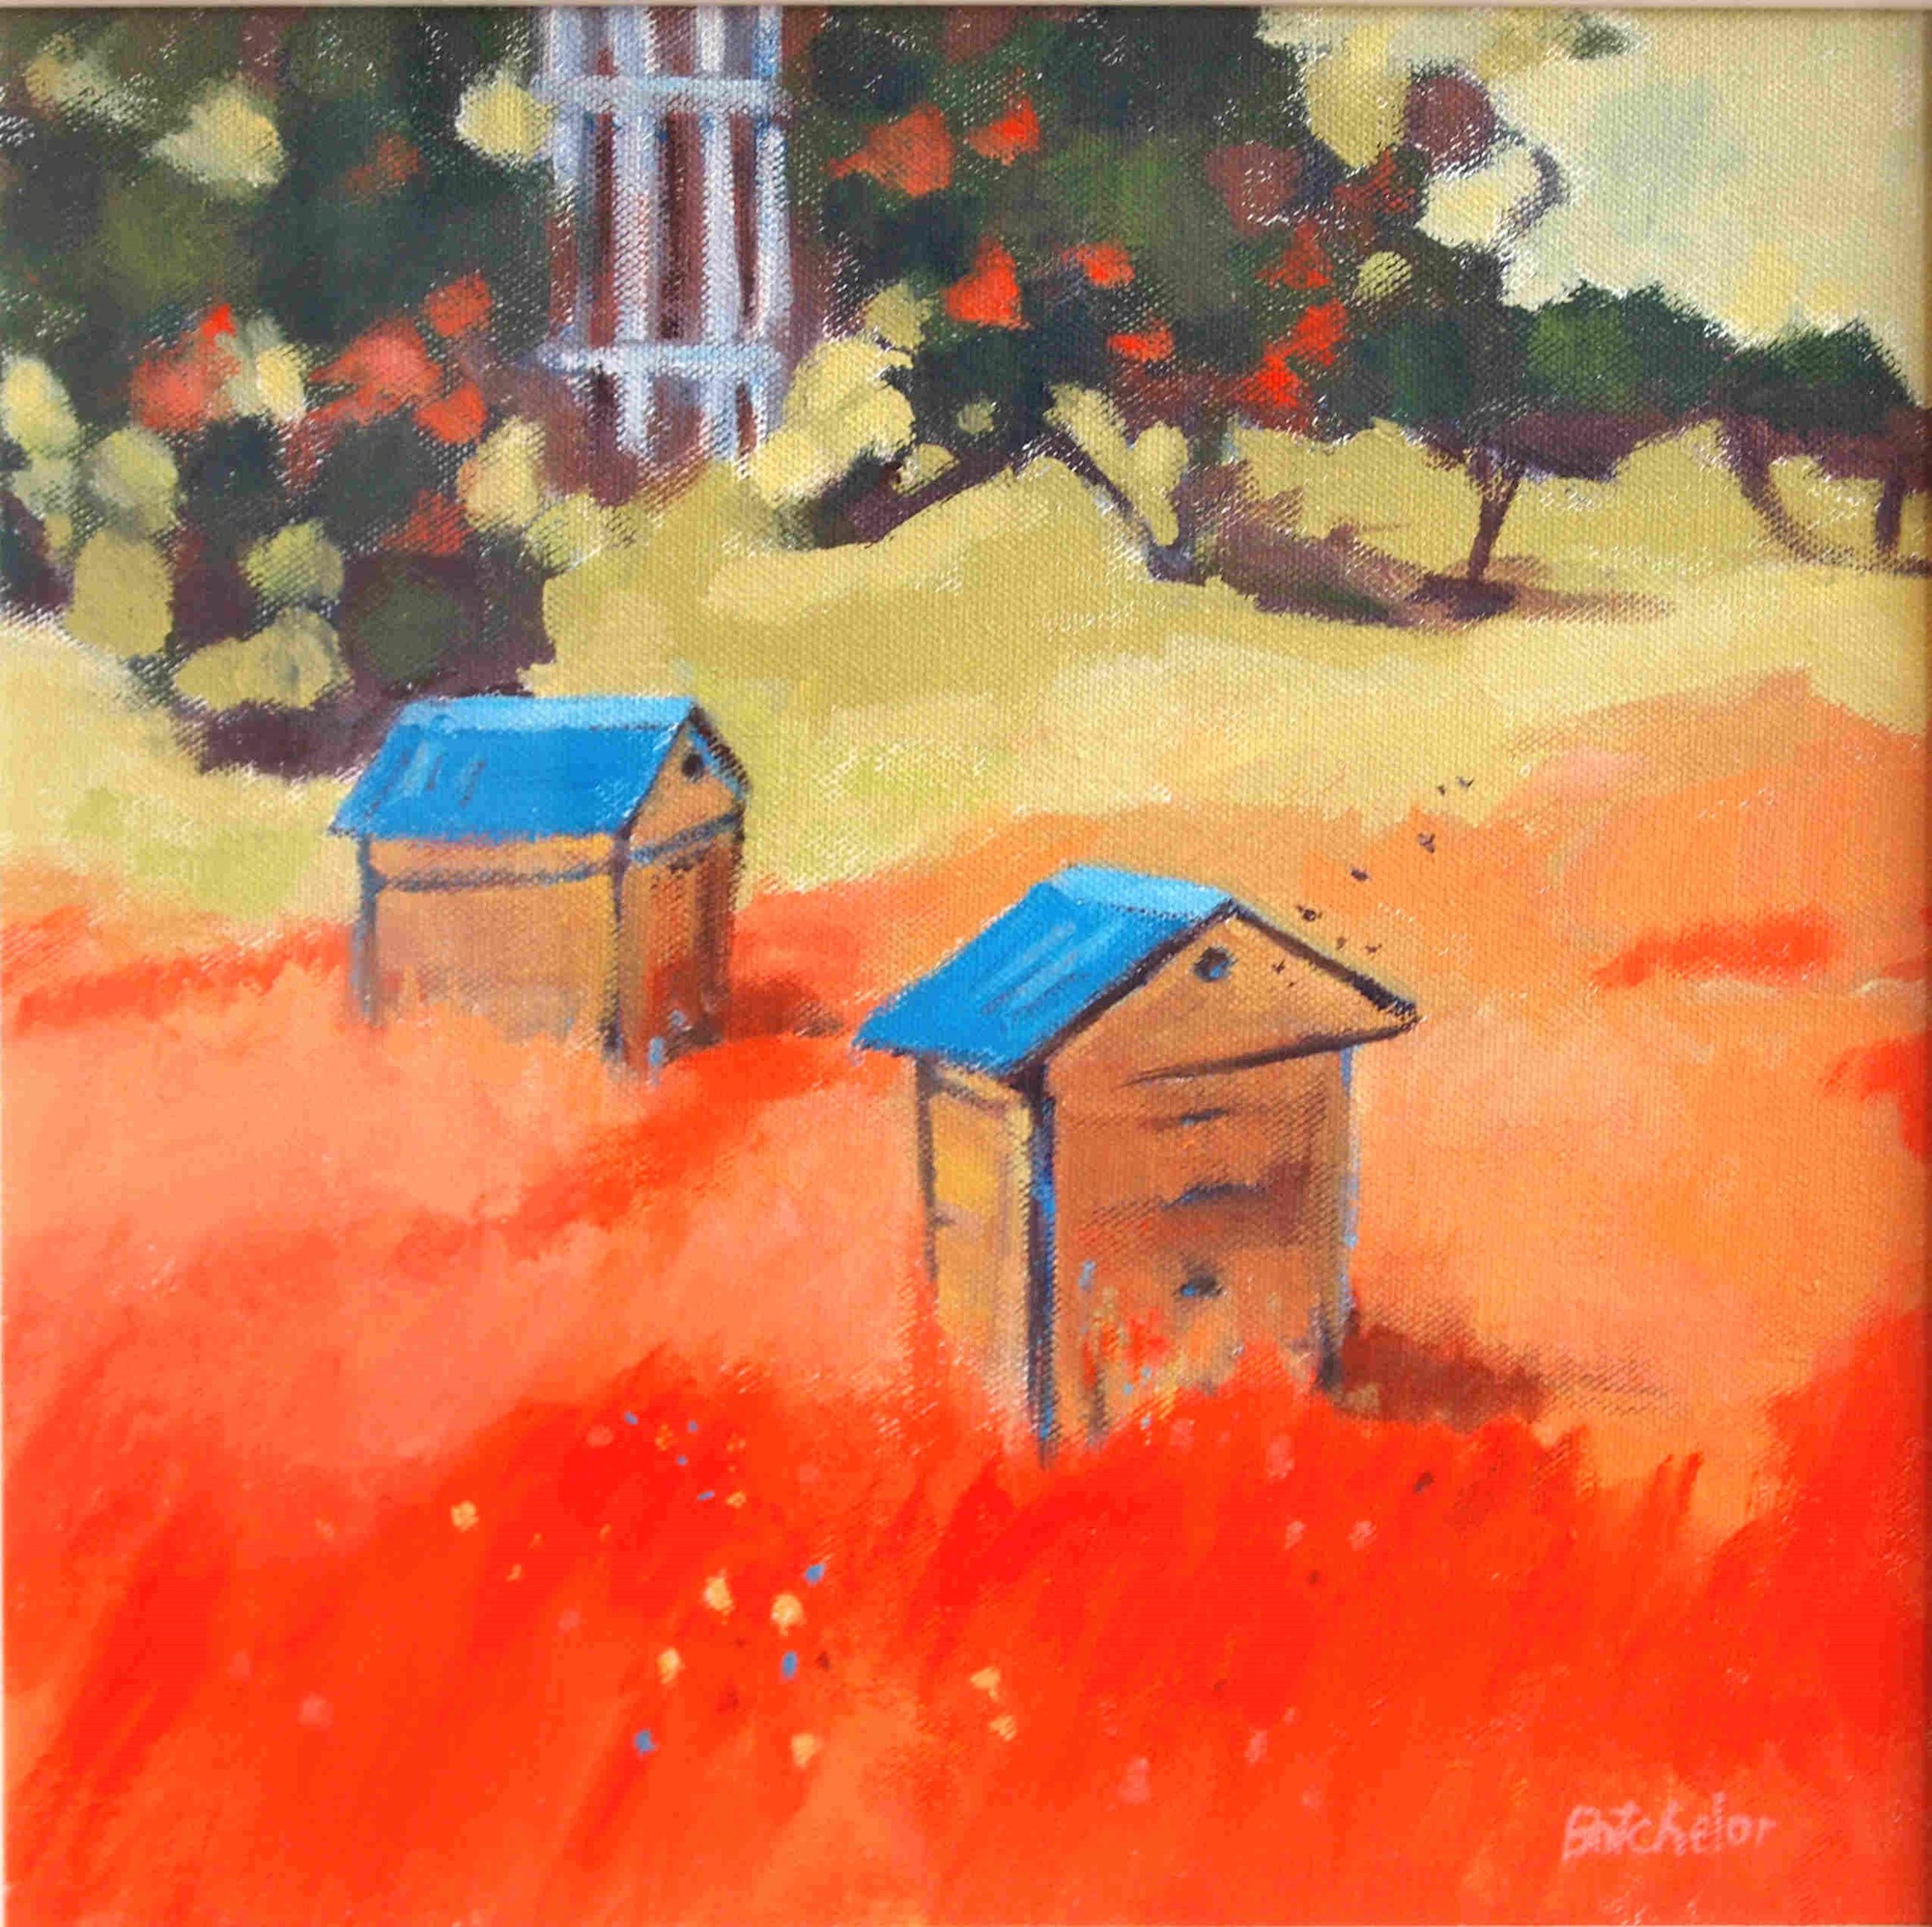 'Beehives' by artist Mary Batchelor